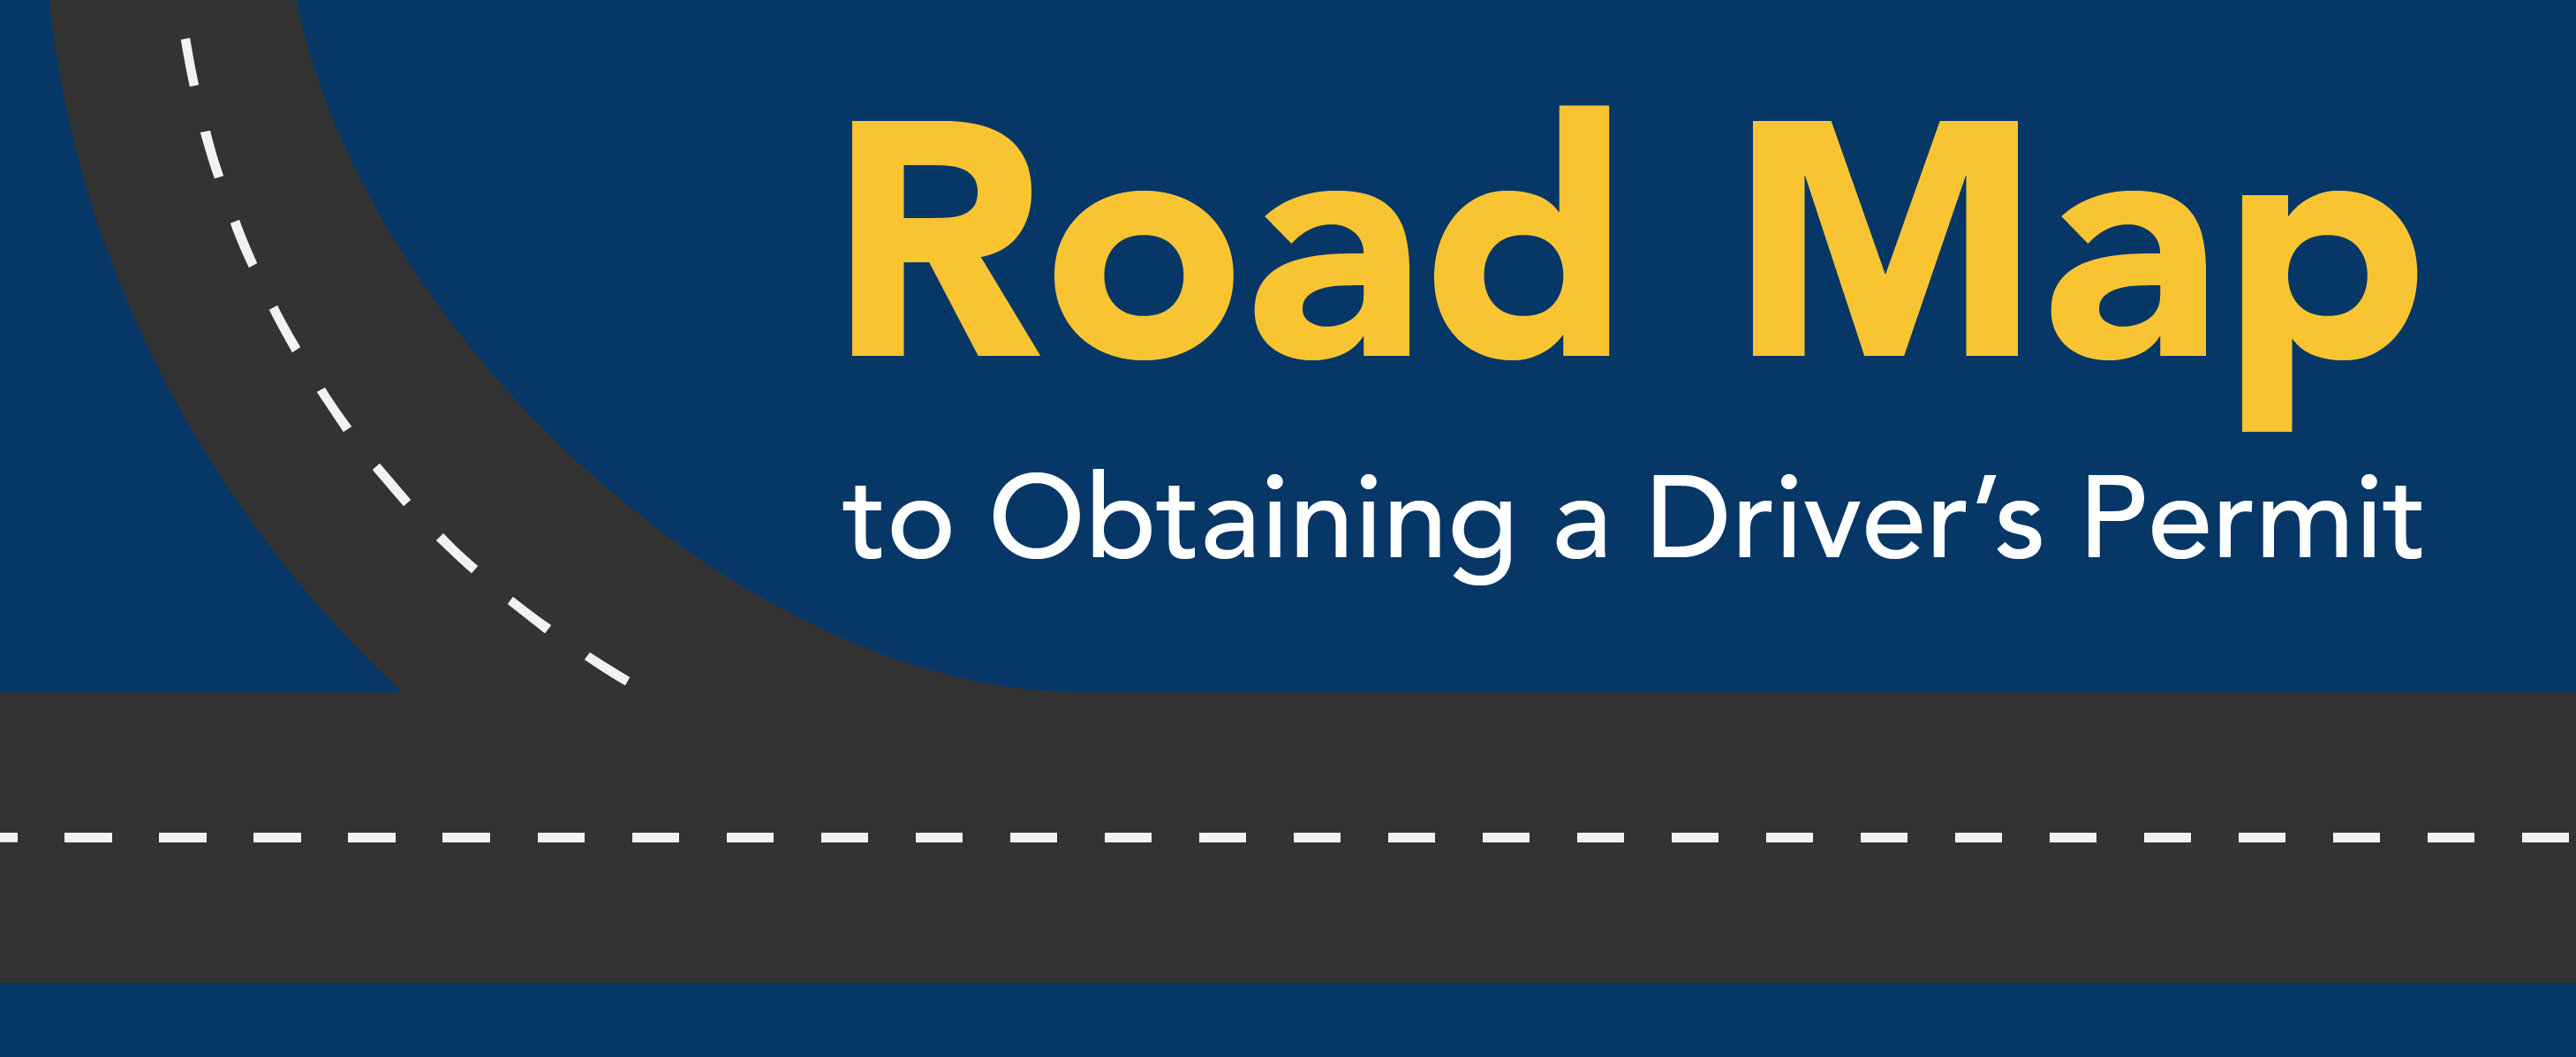 Road map to obtaining a driver's permit. *Image of a road*